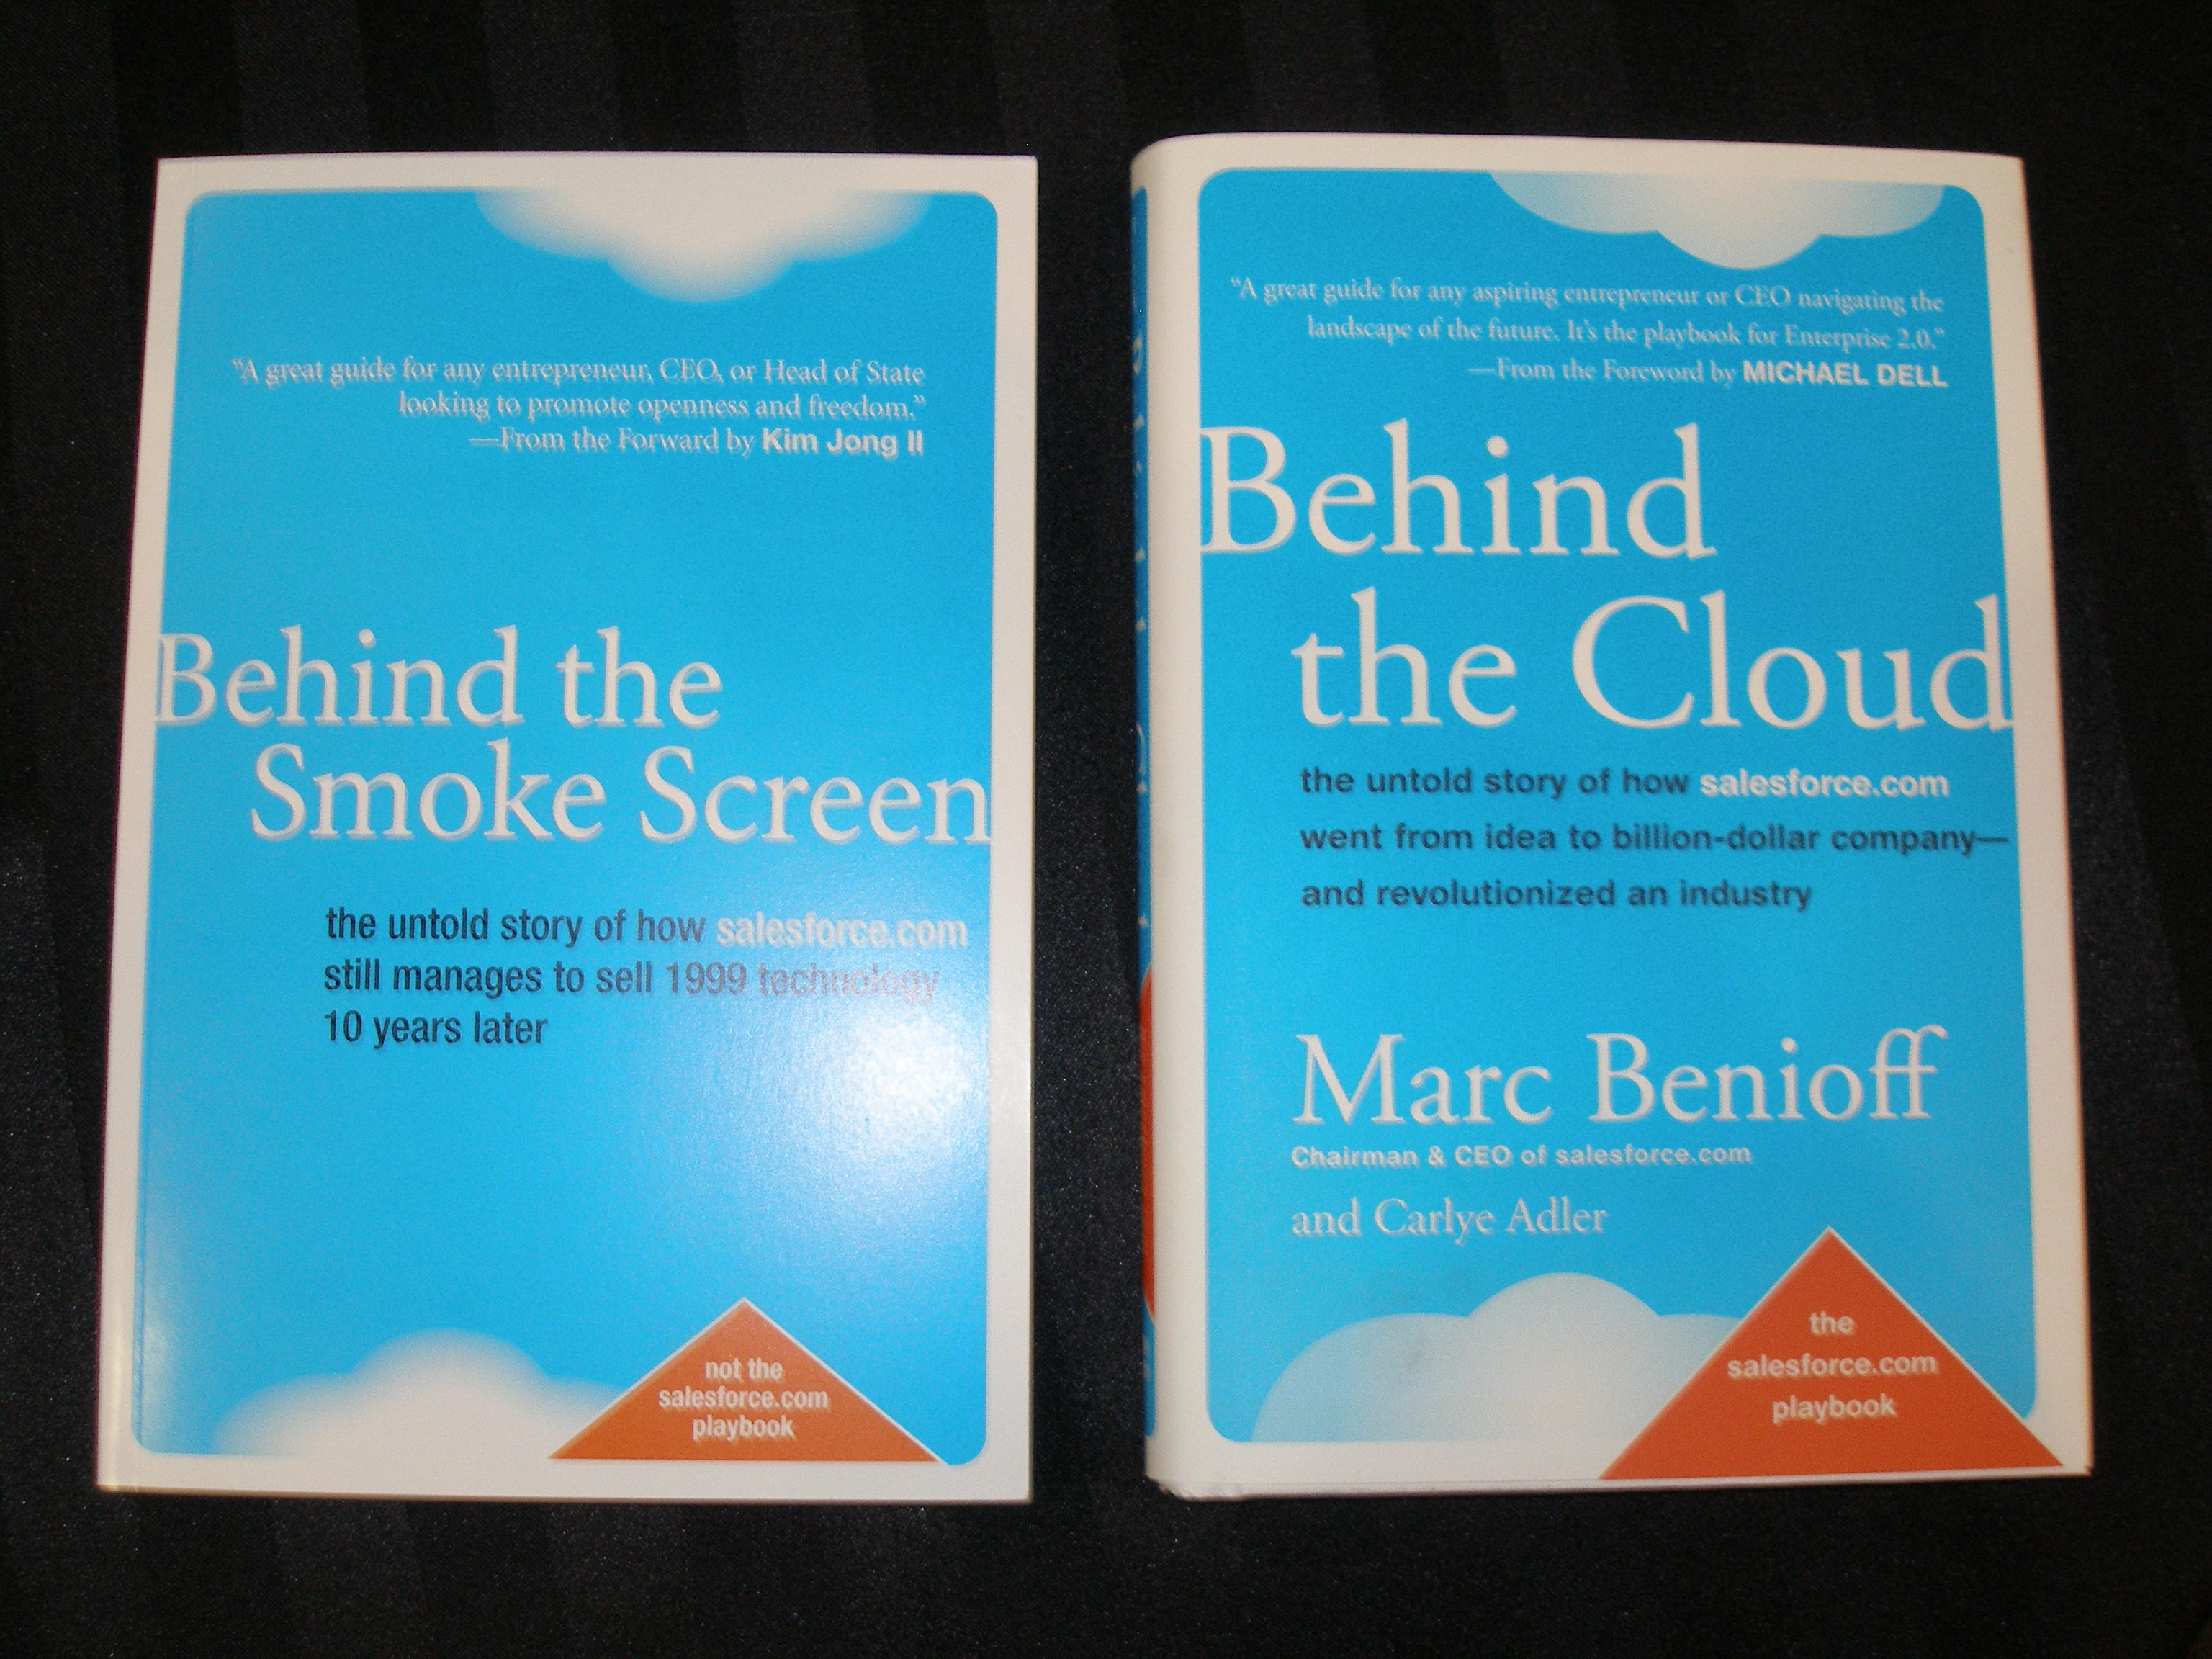 Can You Pick the REAL CRM/Cloud Book?